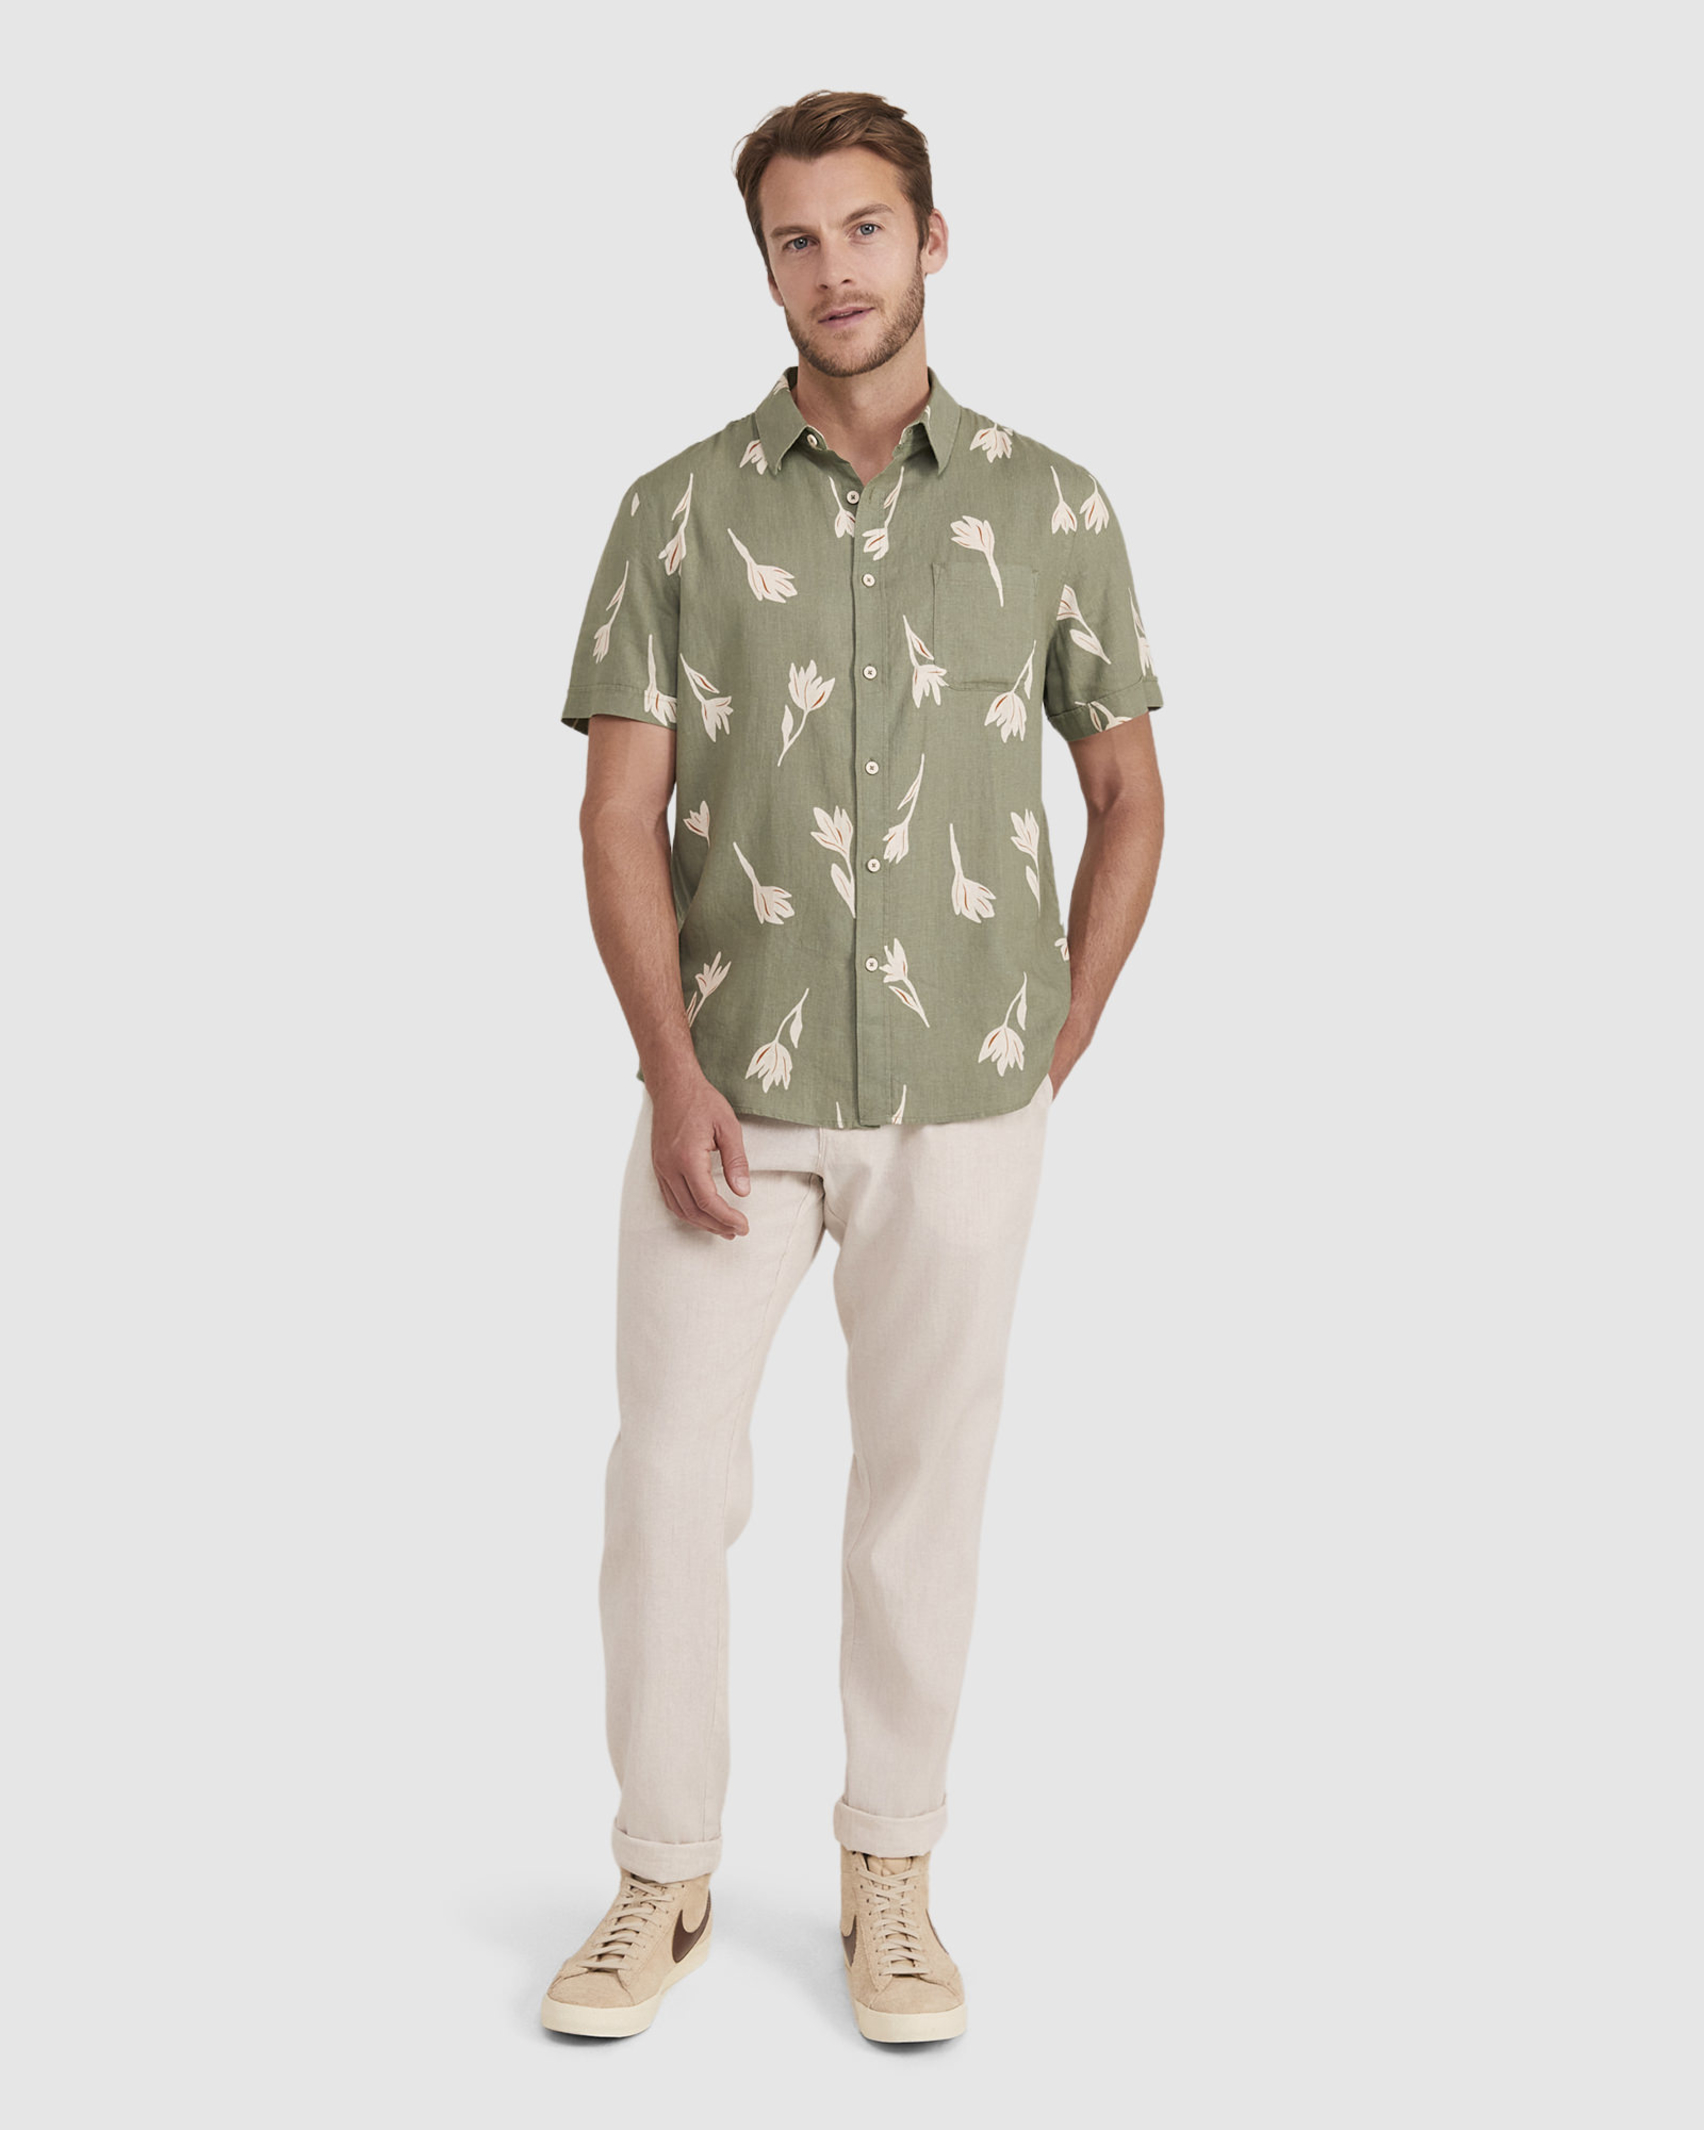 Hume Short Sleeve Shirt in OLIVE